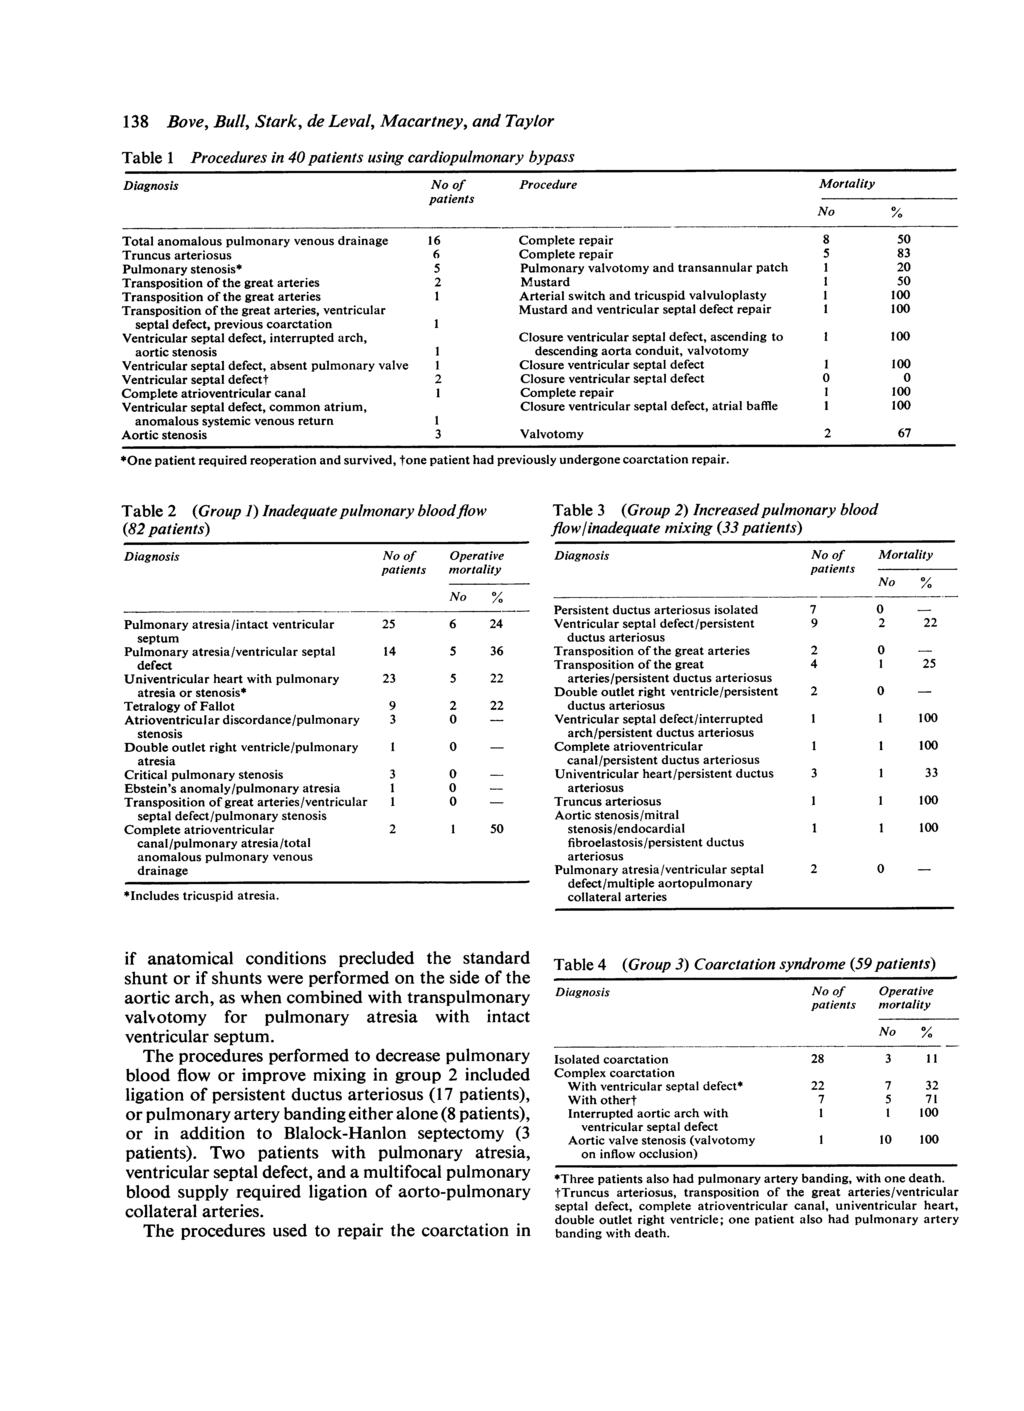 138 Bove, Bull, Stark, de Leval, Macartney, and Taylor Table 1 Procedures in 4 using cardiopulmonary bypass Diagnosis No of Procedure Mortality Total anomalous pulmonary venous drainage 16 Complete